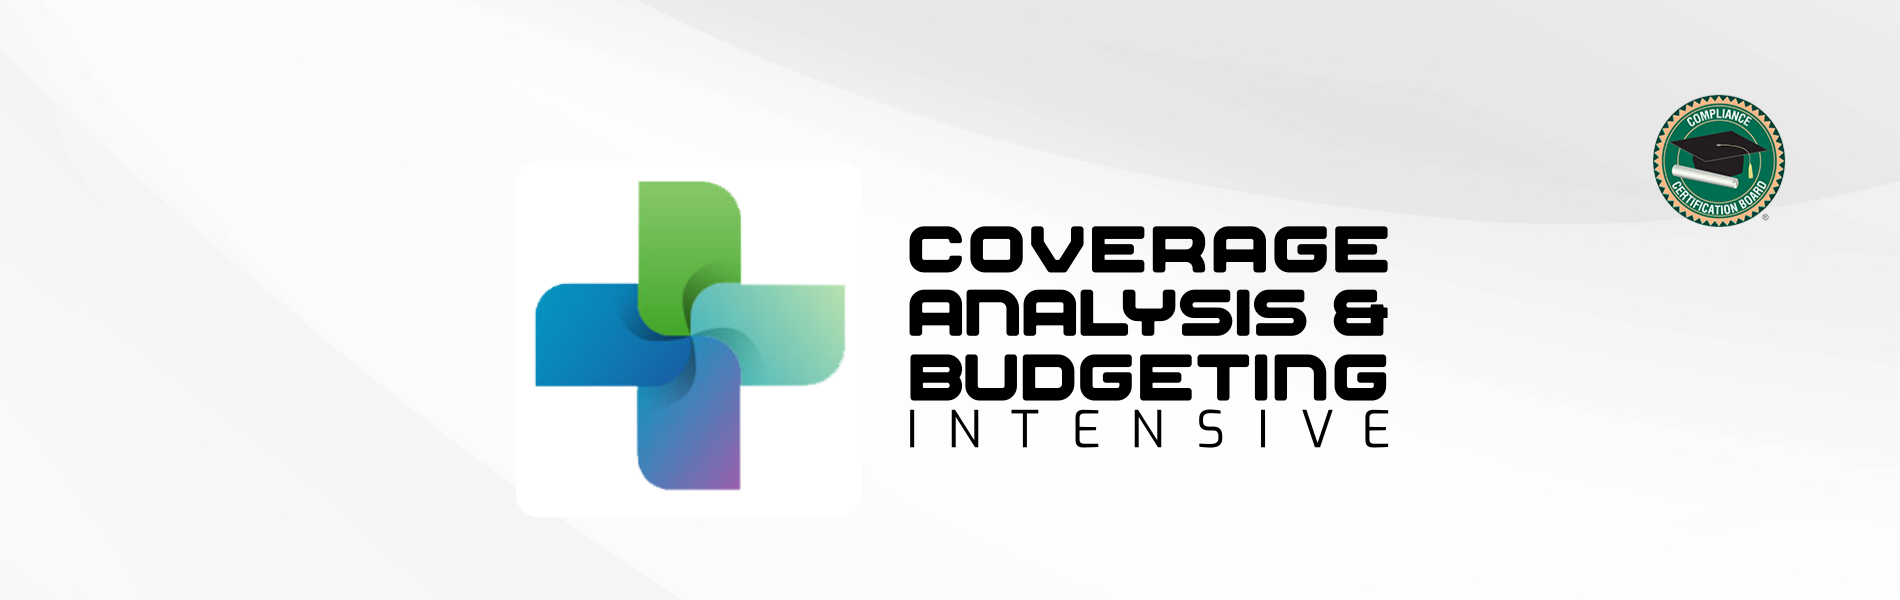 Banner of Coverage Analysis and Budgeting Intensive